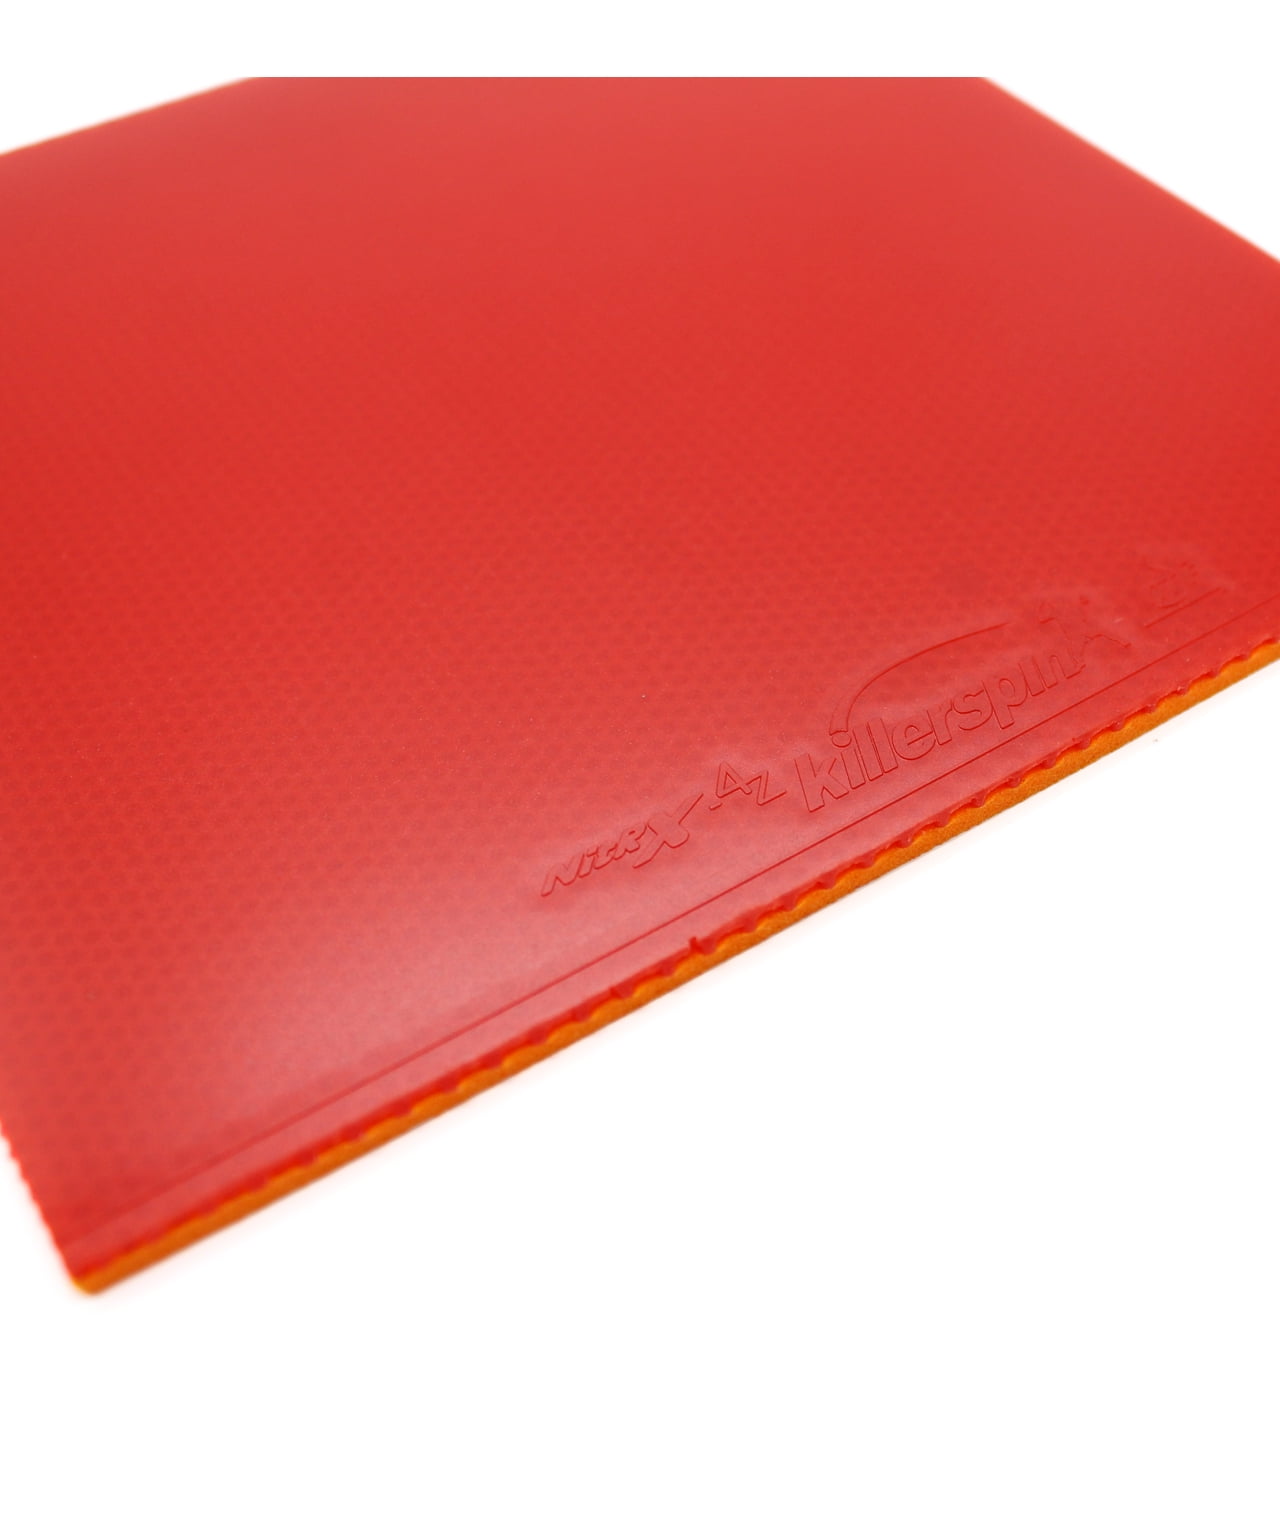 Red Black 2.1mm / Max 2.3mm Butterfly Sriver Table Tennis Rubber 